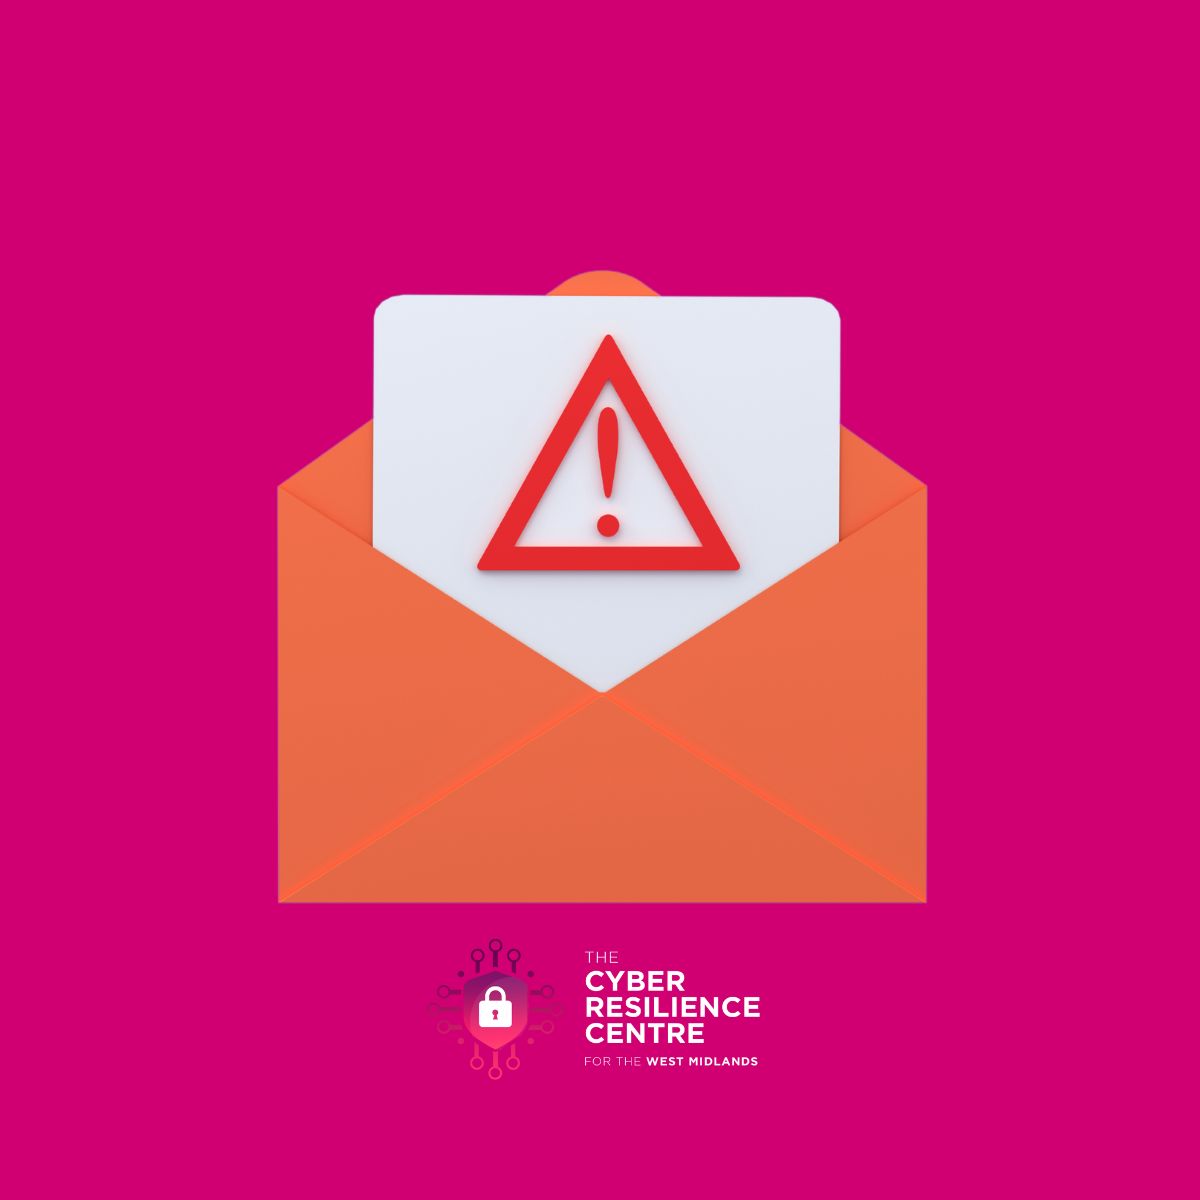 Concerned about email scams? Use DMARC to verify the legitimacy of emails with your business name, protect your brand, prevent hacking, avoid spam, and track senders. Implement DMARC for secure and trusted communications. Join us for more tips at wmcrc.co.uk/membership